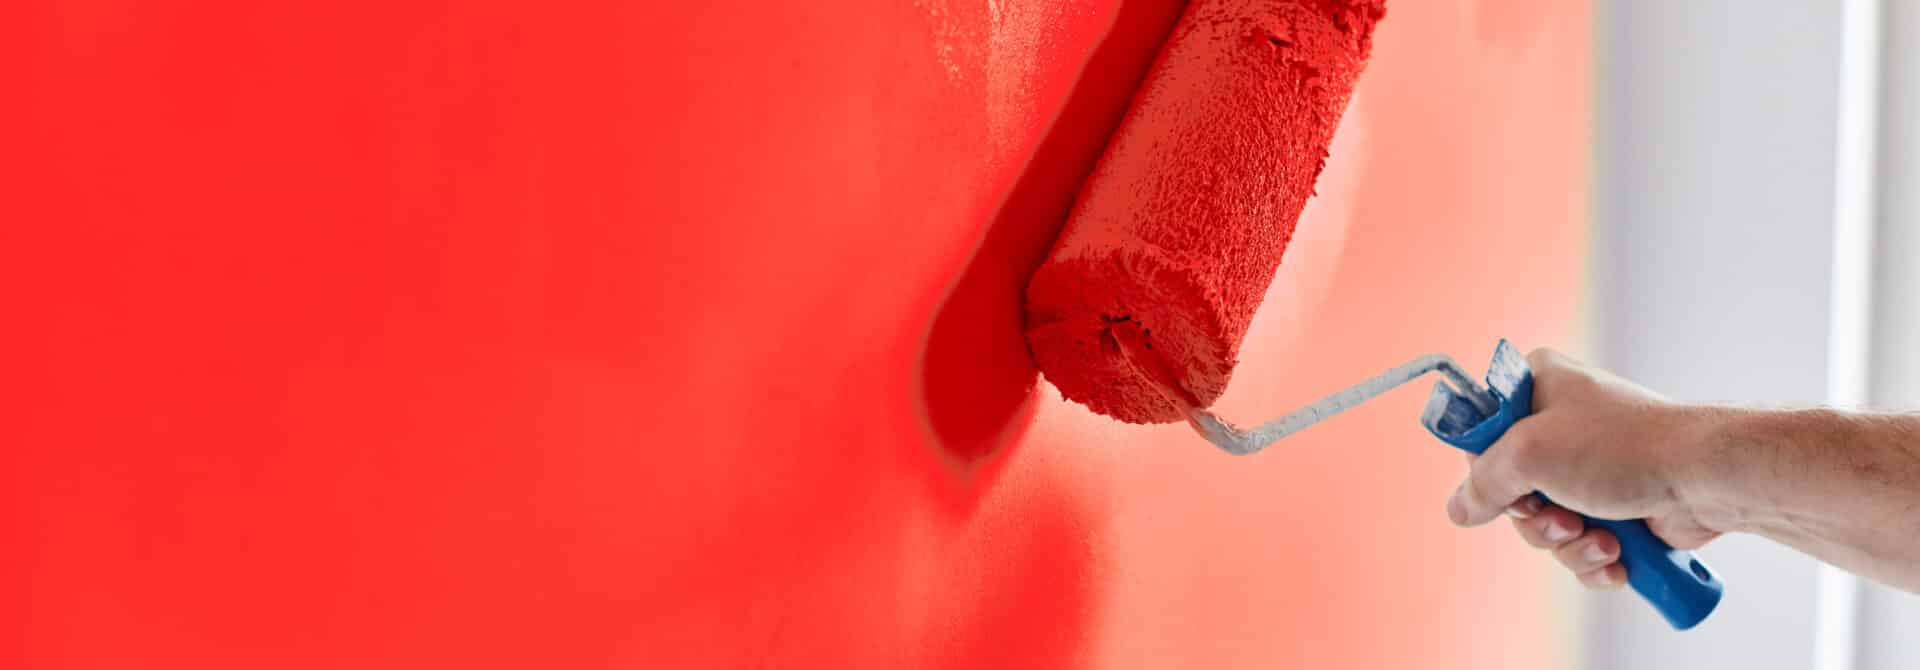 hand painting a wall red with a roller brush